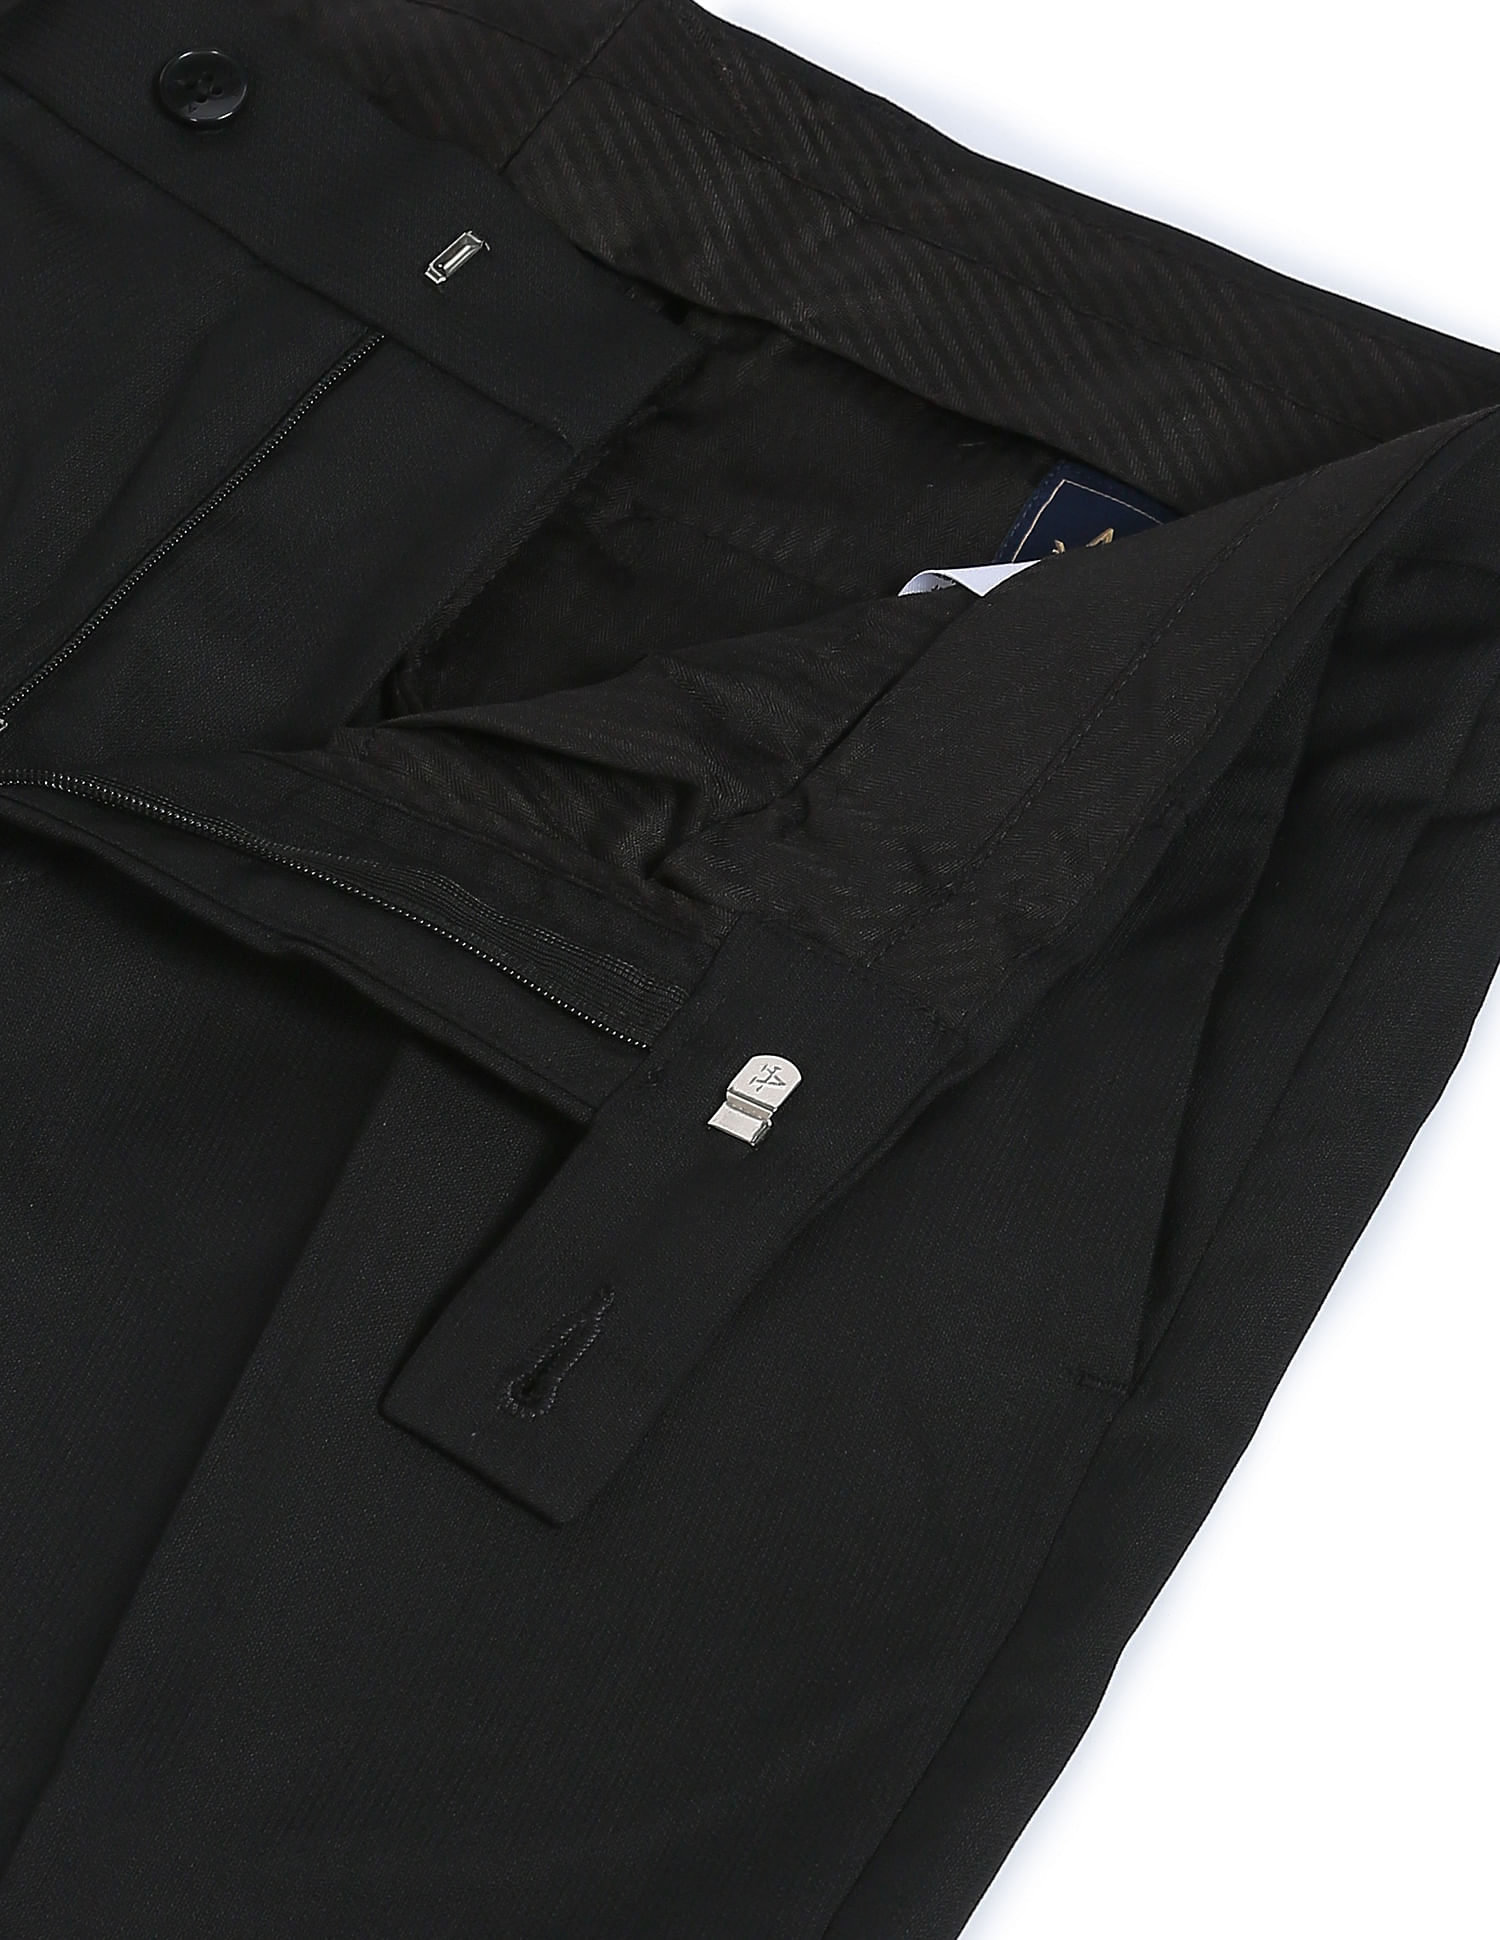 Black Solid ABOK Formal Trousers For Men Stretchable High Quality Pants  Regular Fit